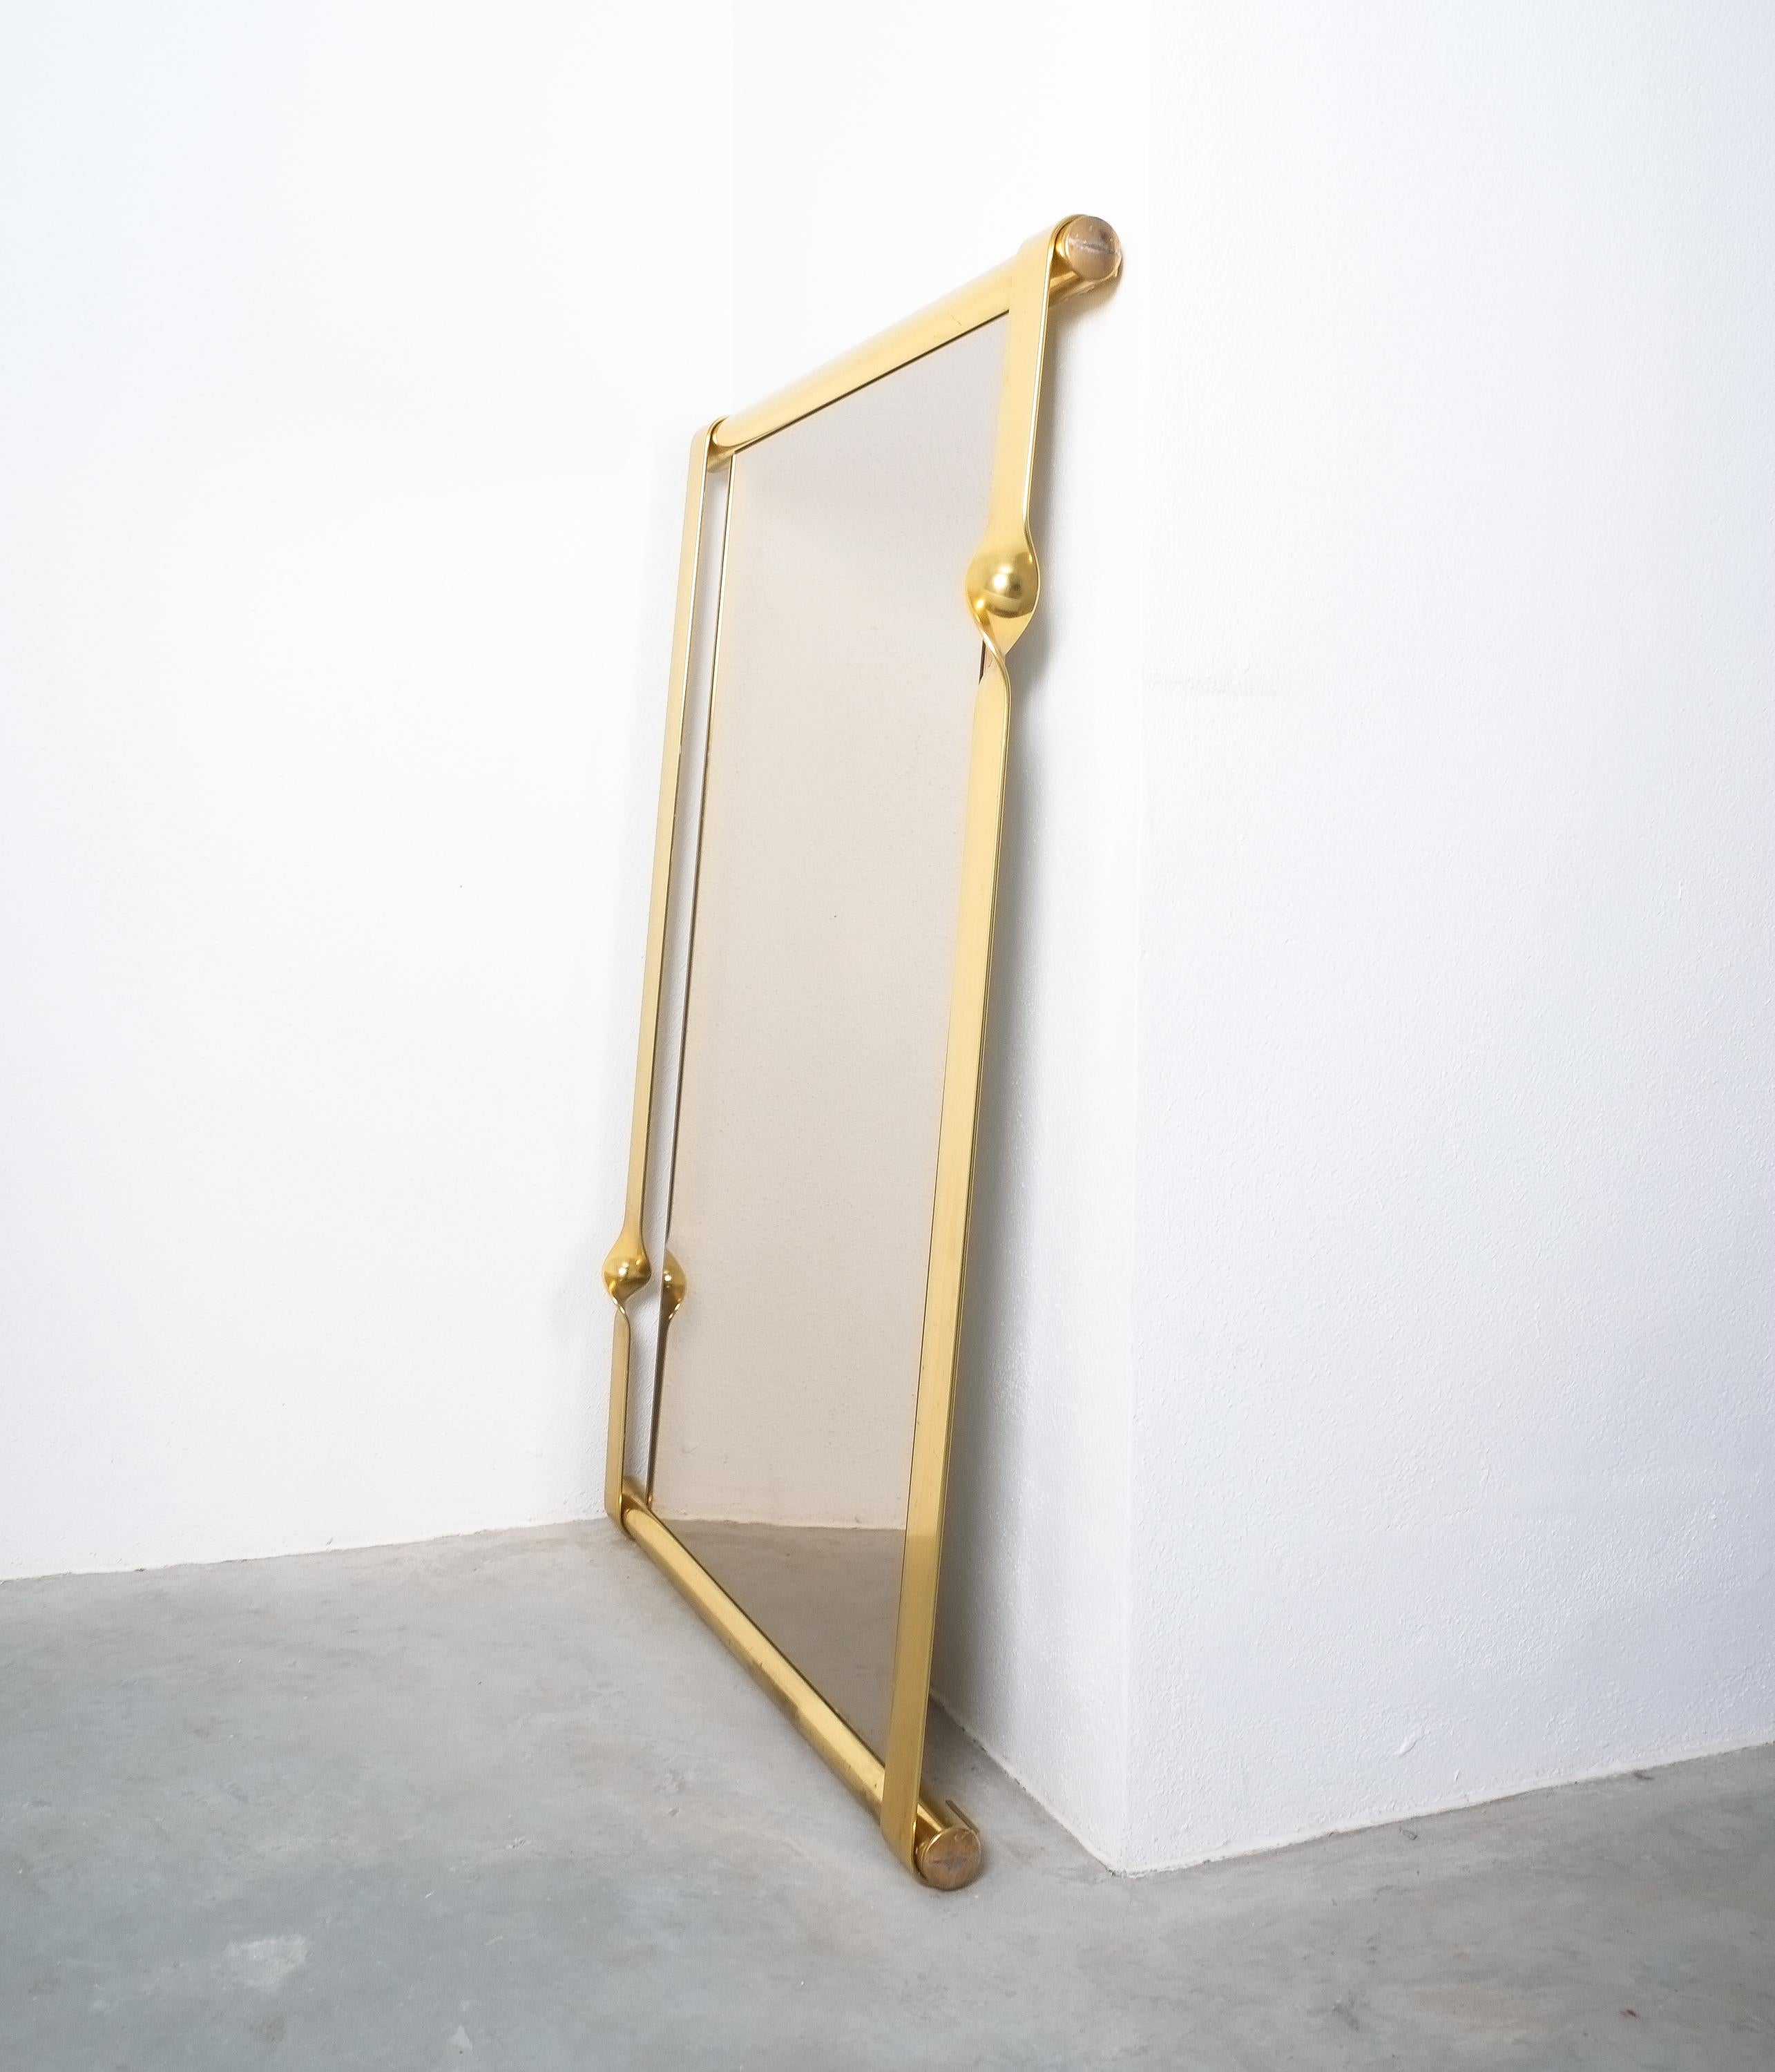 Luciano Frigerio Midcentury Mirror with Golden Twisted Frame, Italy, circa 1965 For Sale 2